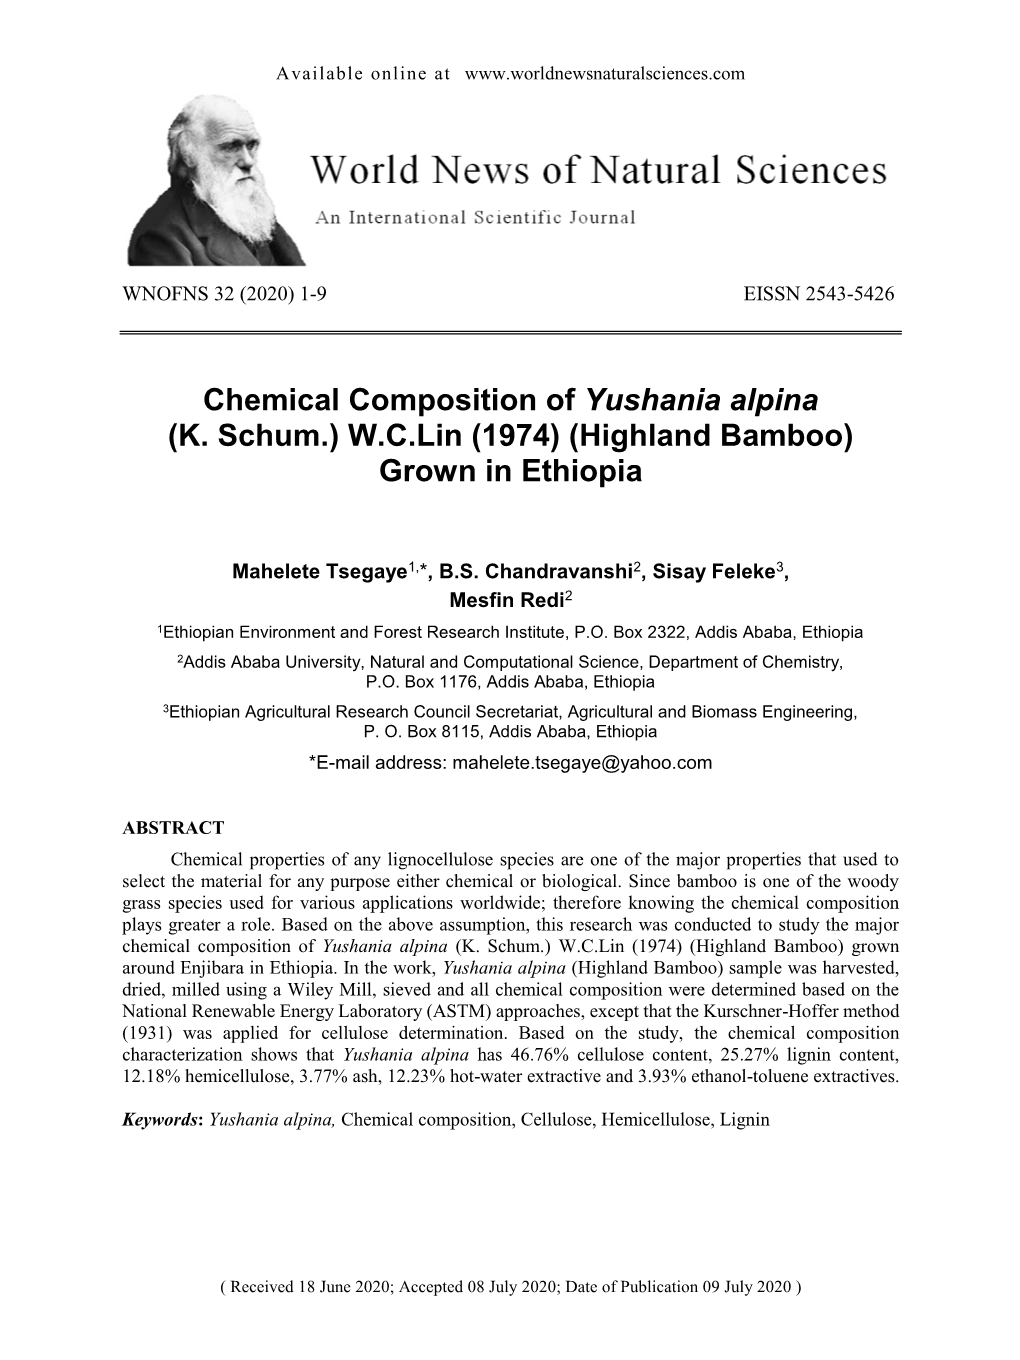 Chemical Composition of Yushania Alpina (K. Schum.) W.C.Lin (1974) (Highland Bamboo) Grown in Ethiopia